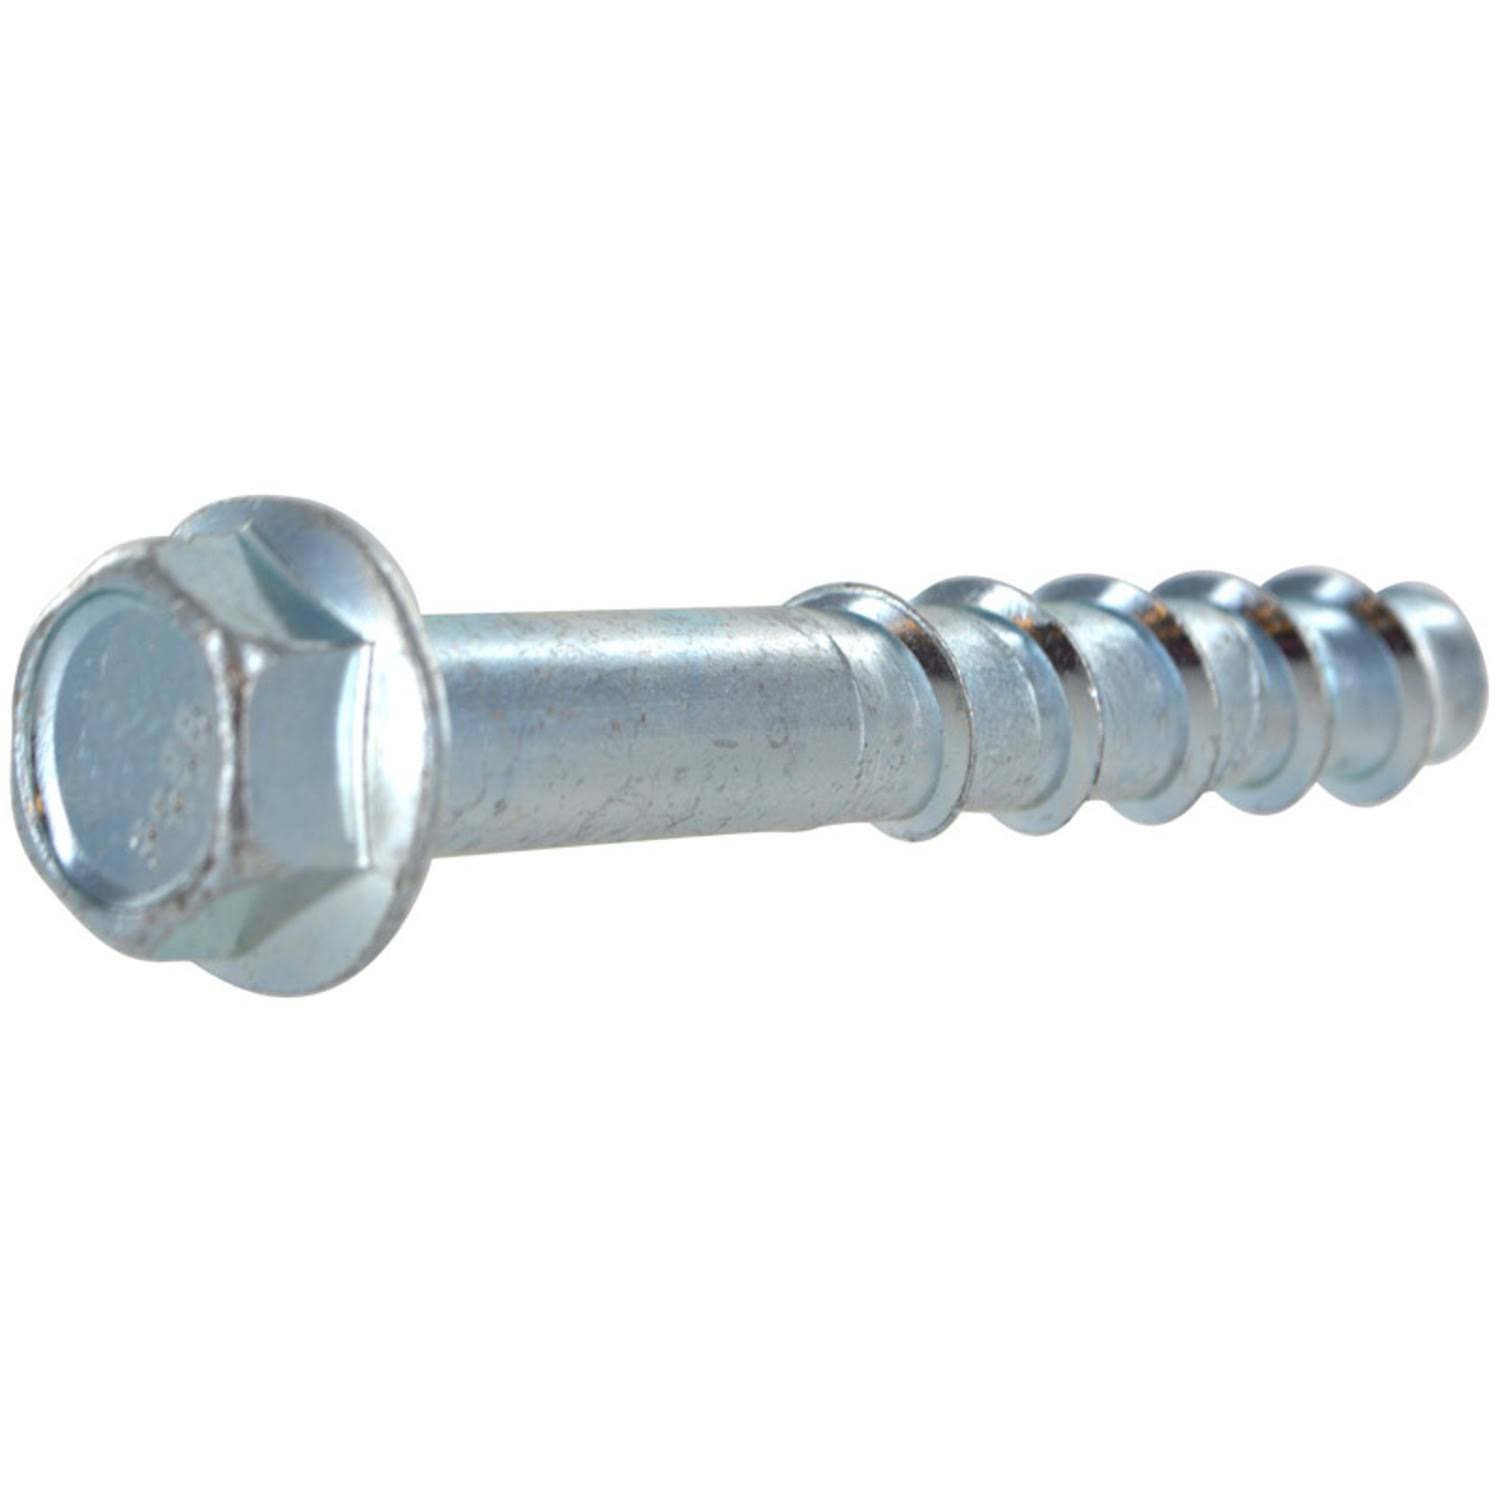 Hillman Fasteners 372215 Screw-Bolt+ Concrete Screw Anchor, Zinc Plated | General | Free Shipping On All Orders | 30 Day Money Back Guarantee